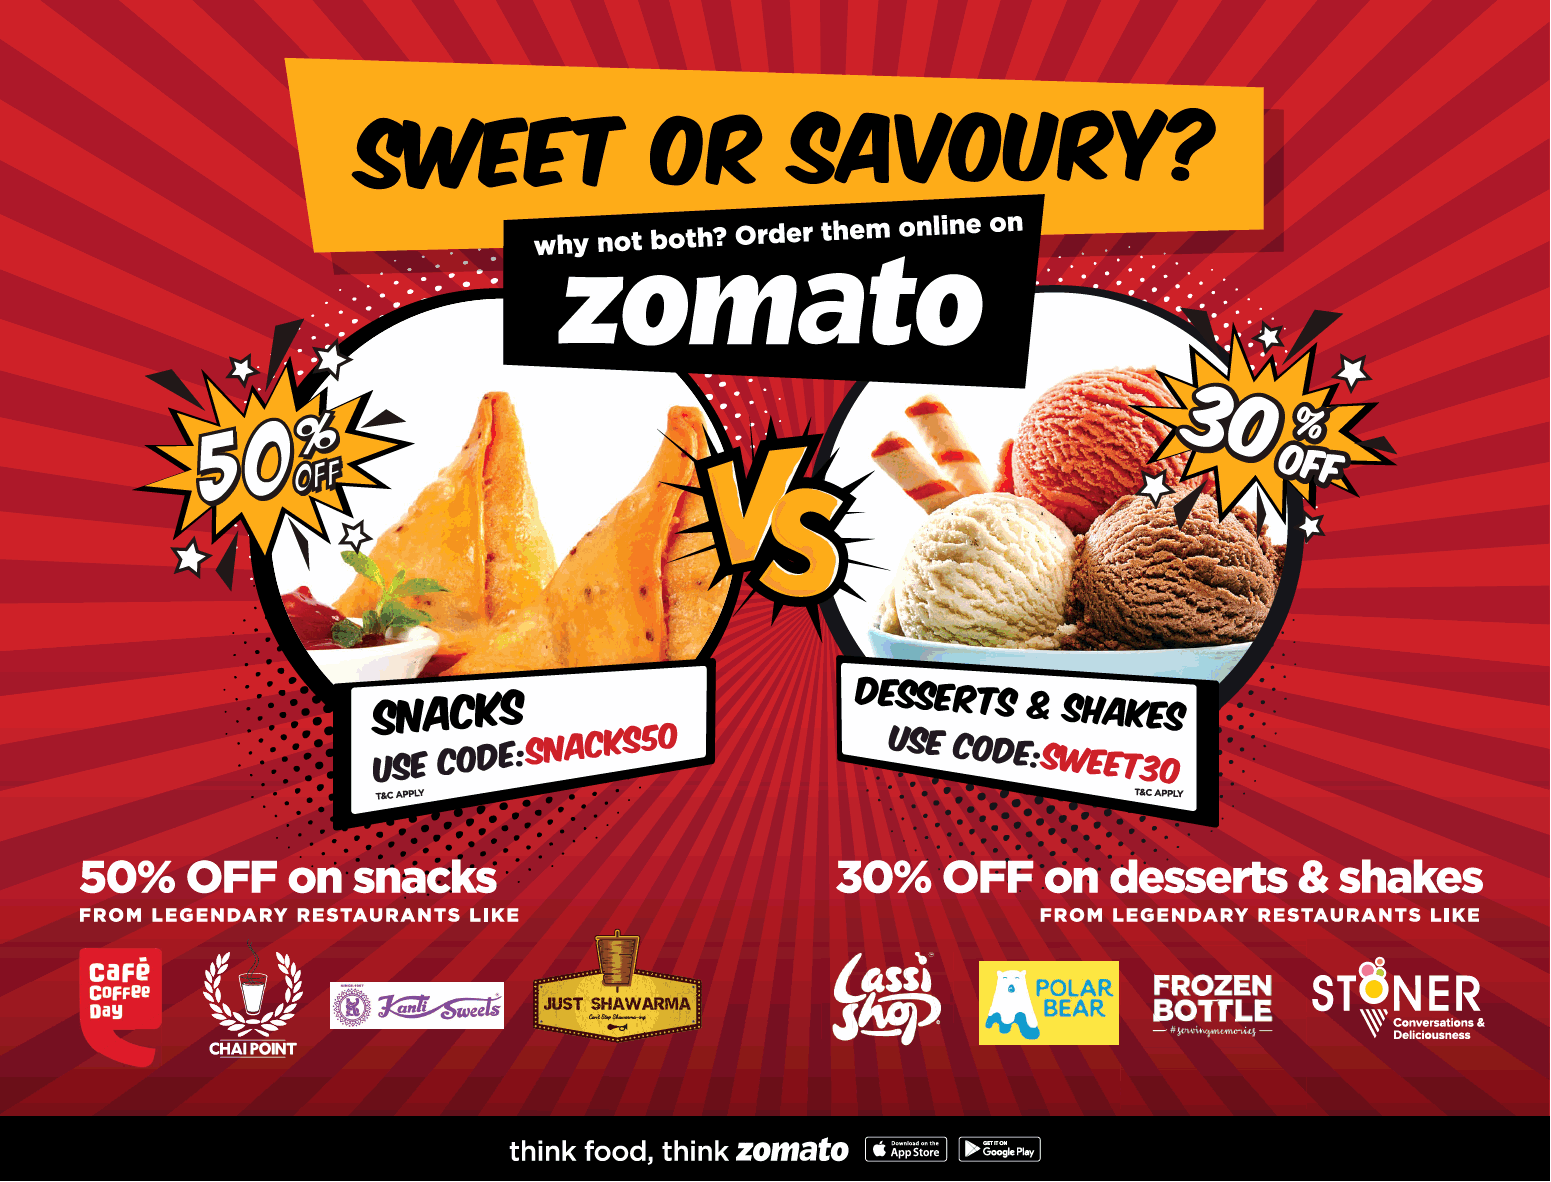 sweet or savoury why no both online zomato ad times of india bangalore 26 08 2018